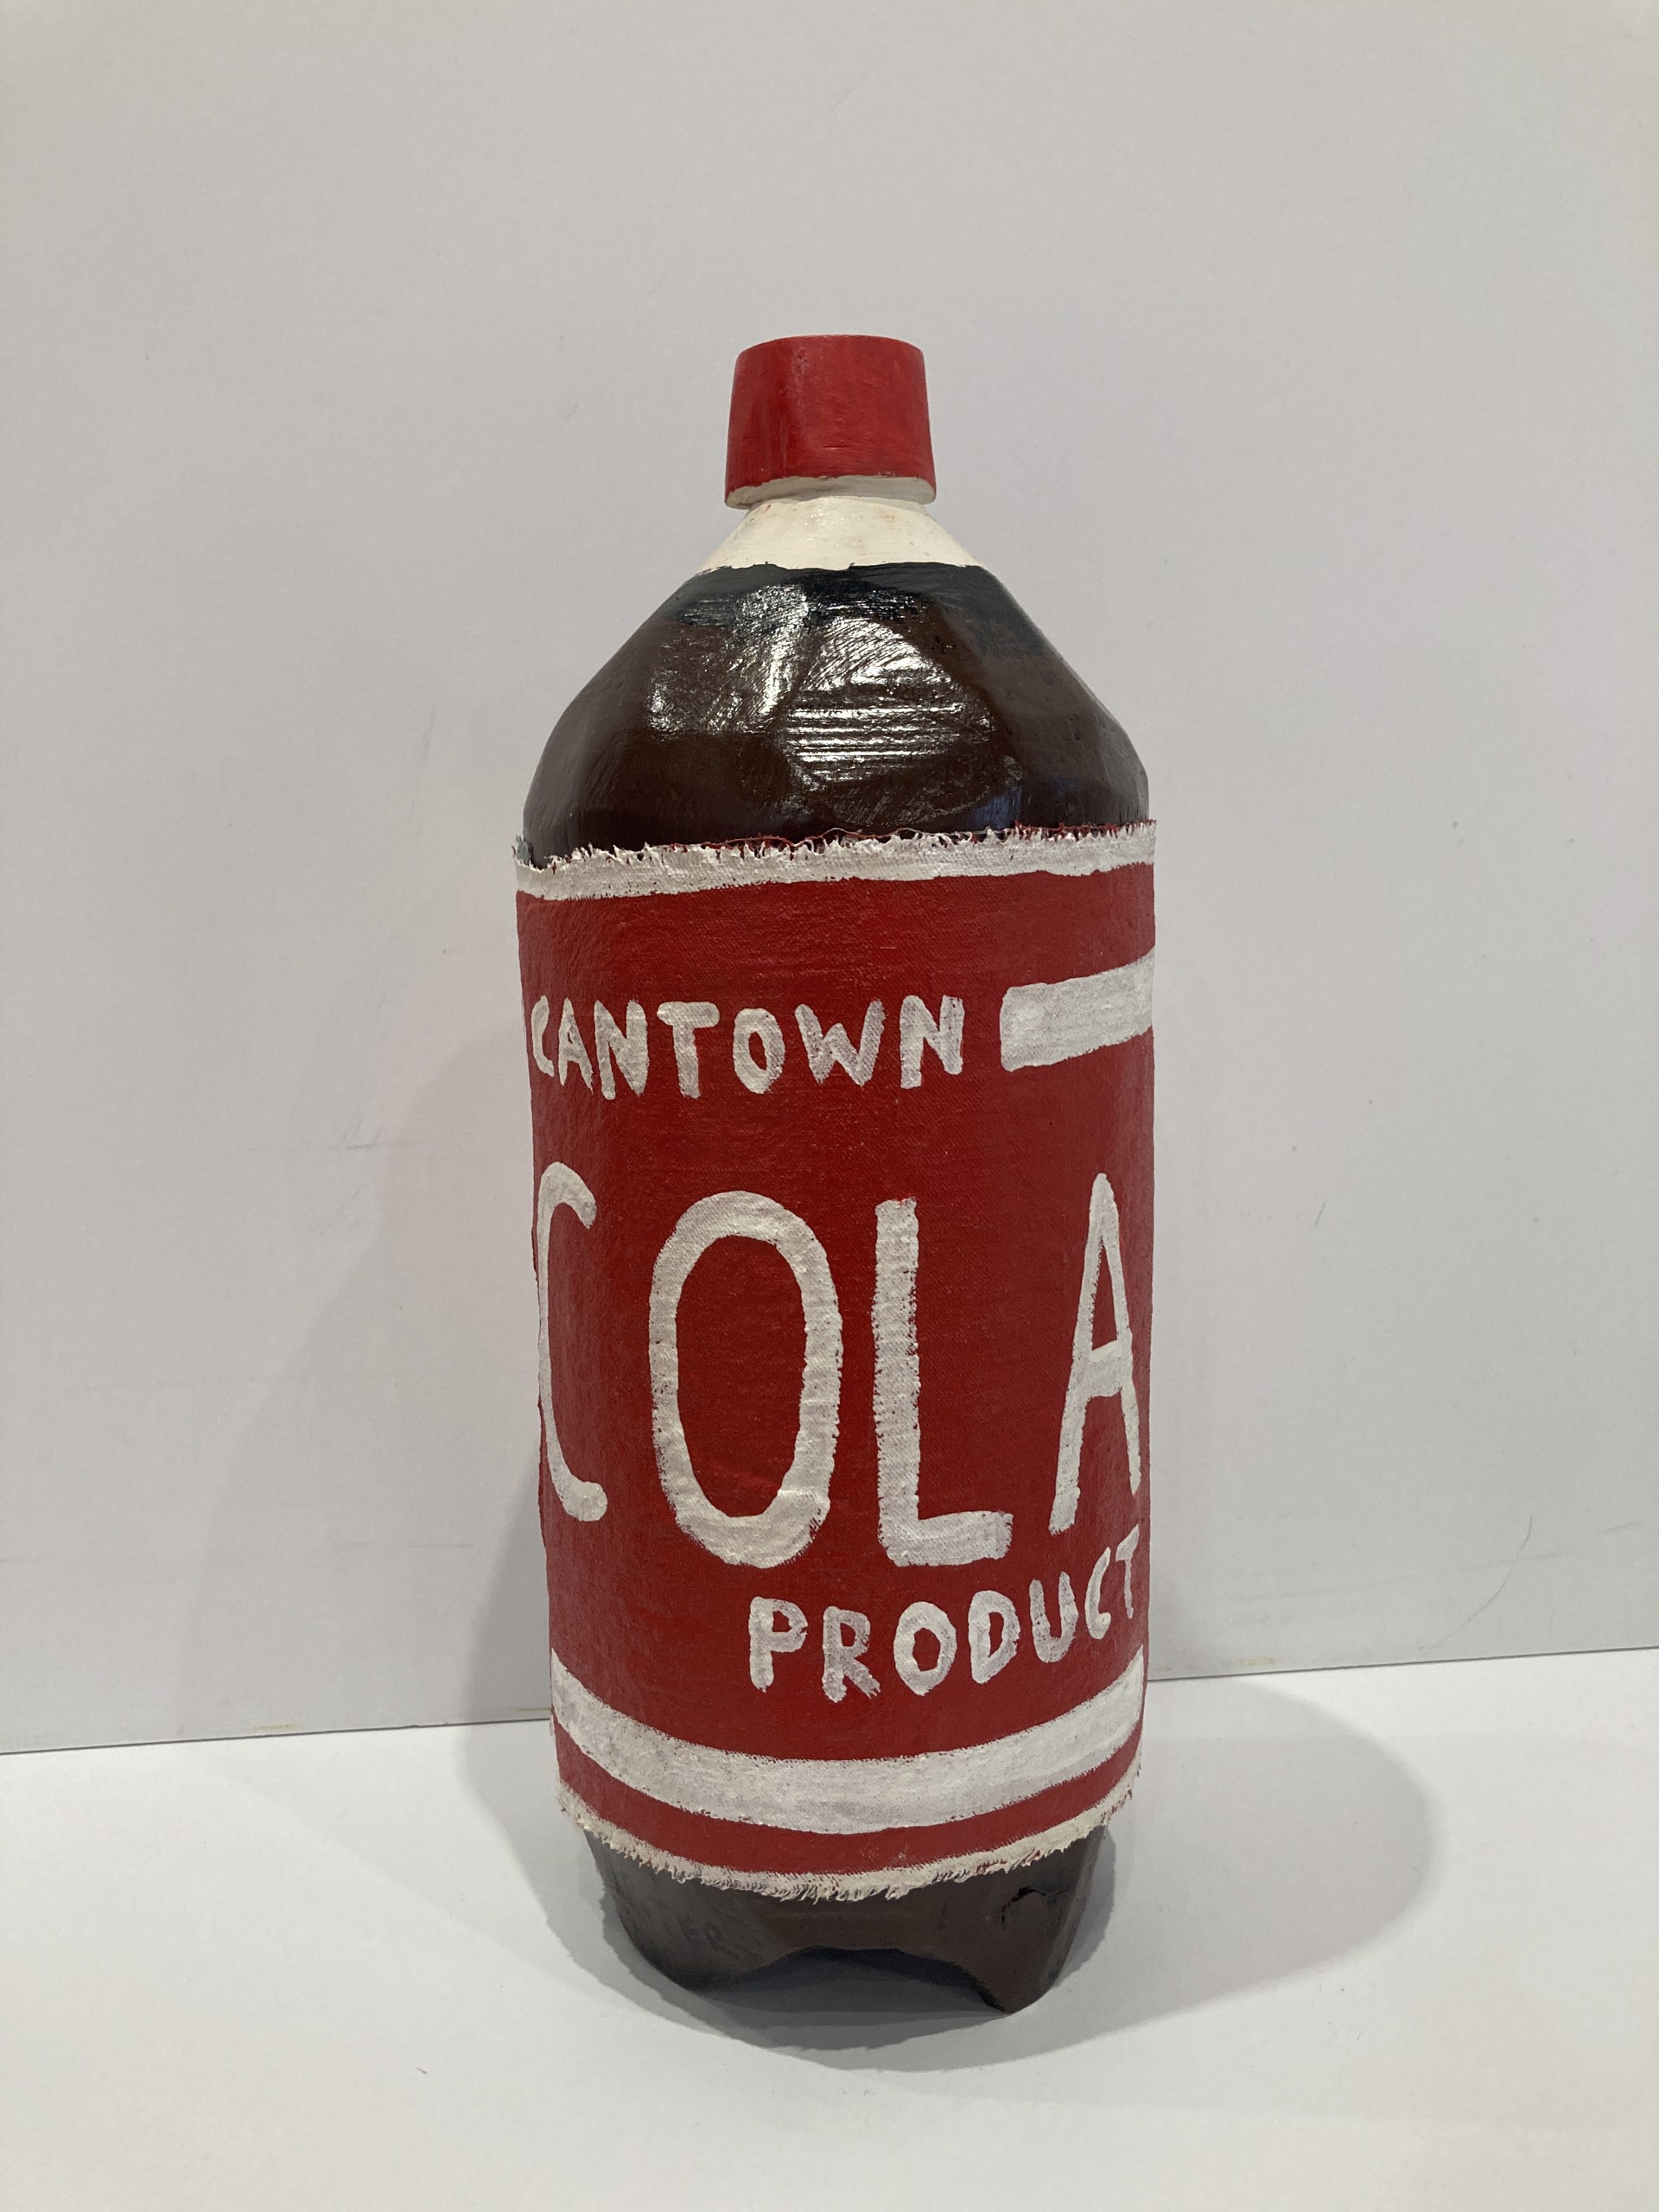 Cantown Cola by Matthew Barter